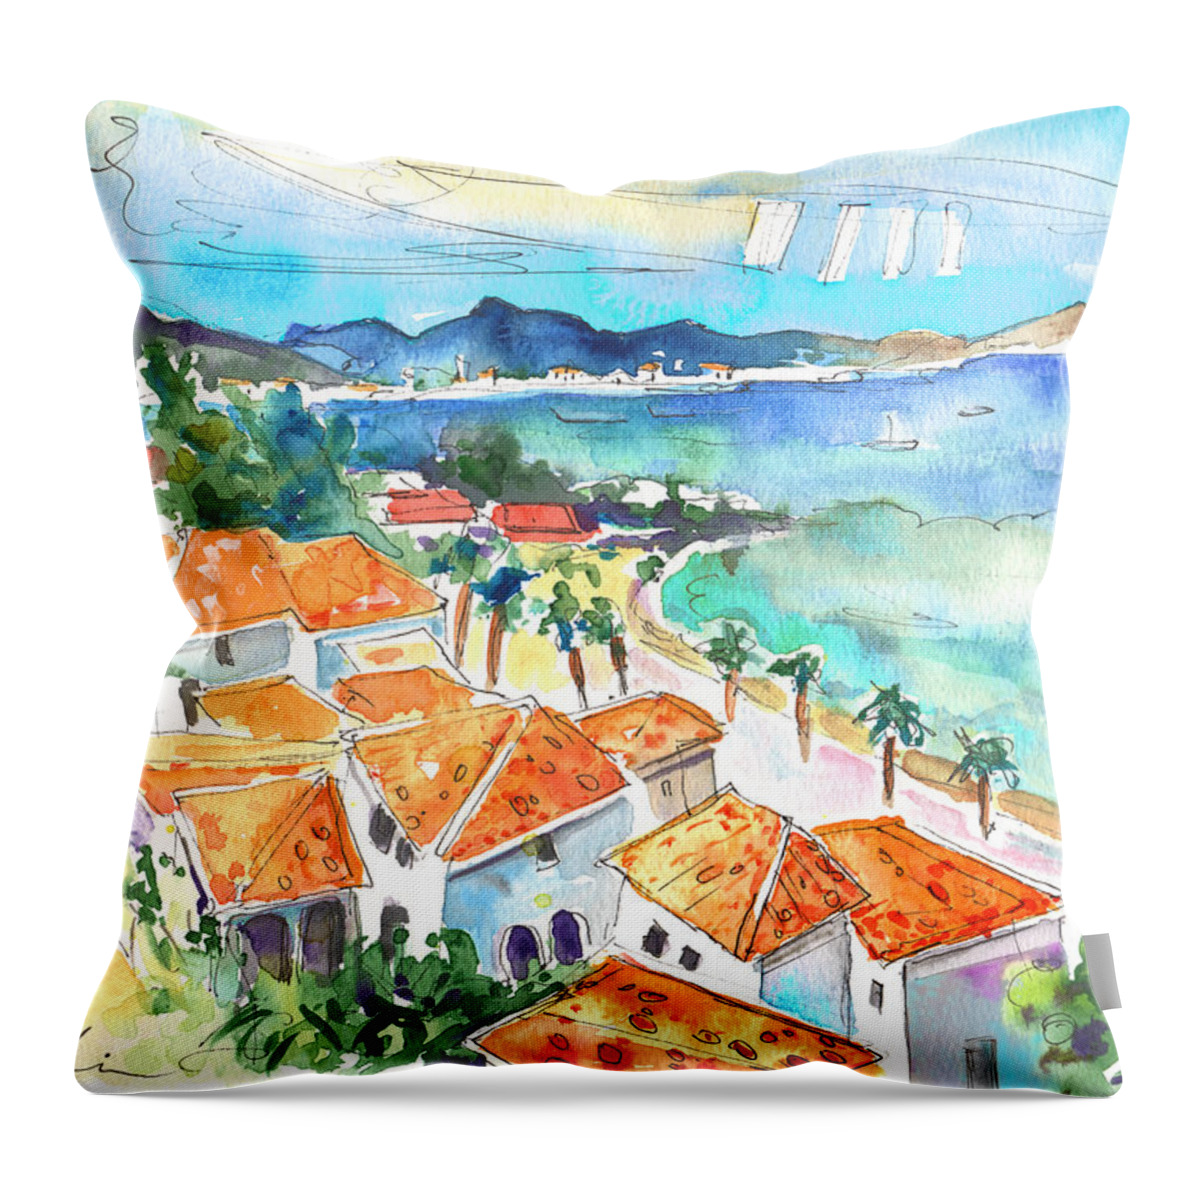 Caribbean Islands Throw Pillow featuring the painting Bay of Saint Martin by Miki De Goodaboom